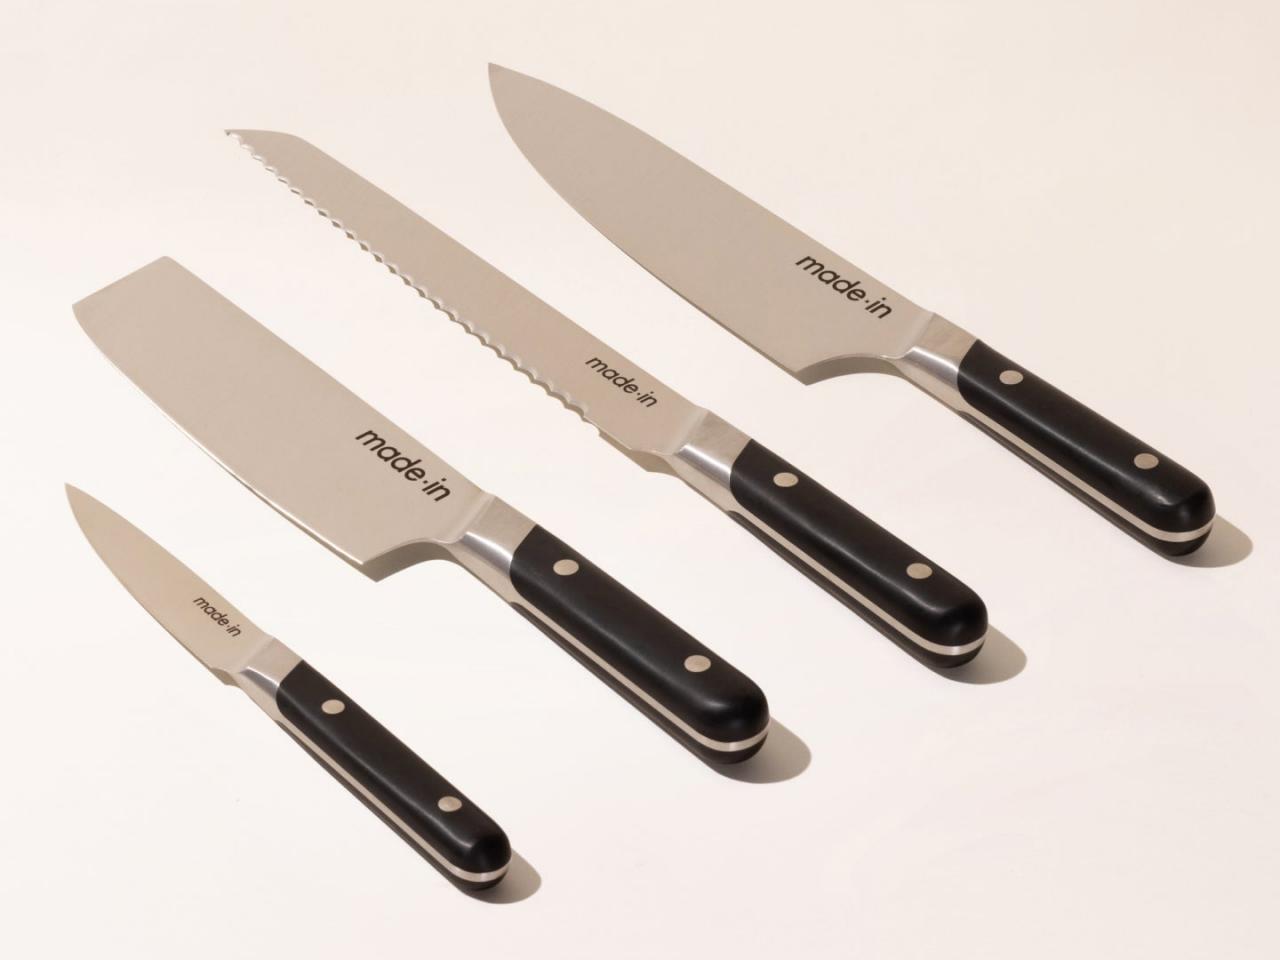 https://food.fnr.sndimg.com/content/dam/images/food/products/2023/11/21/rx_the-knife-set.jpeg.rend.hgtvcom.1280.960.suffix/1700602622770.jpeg